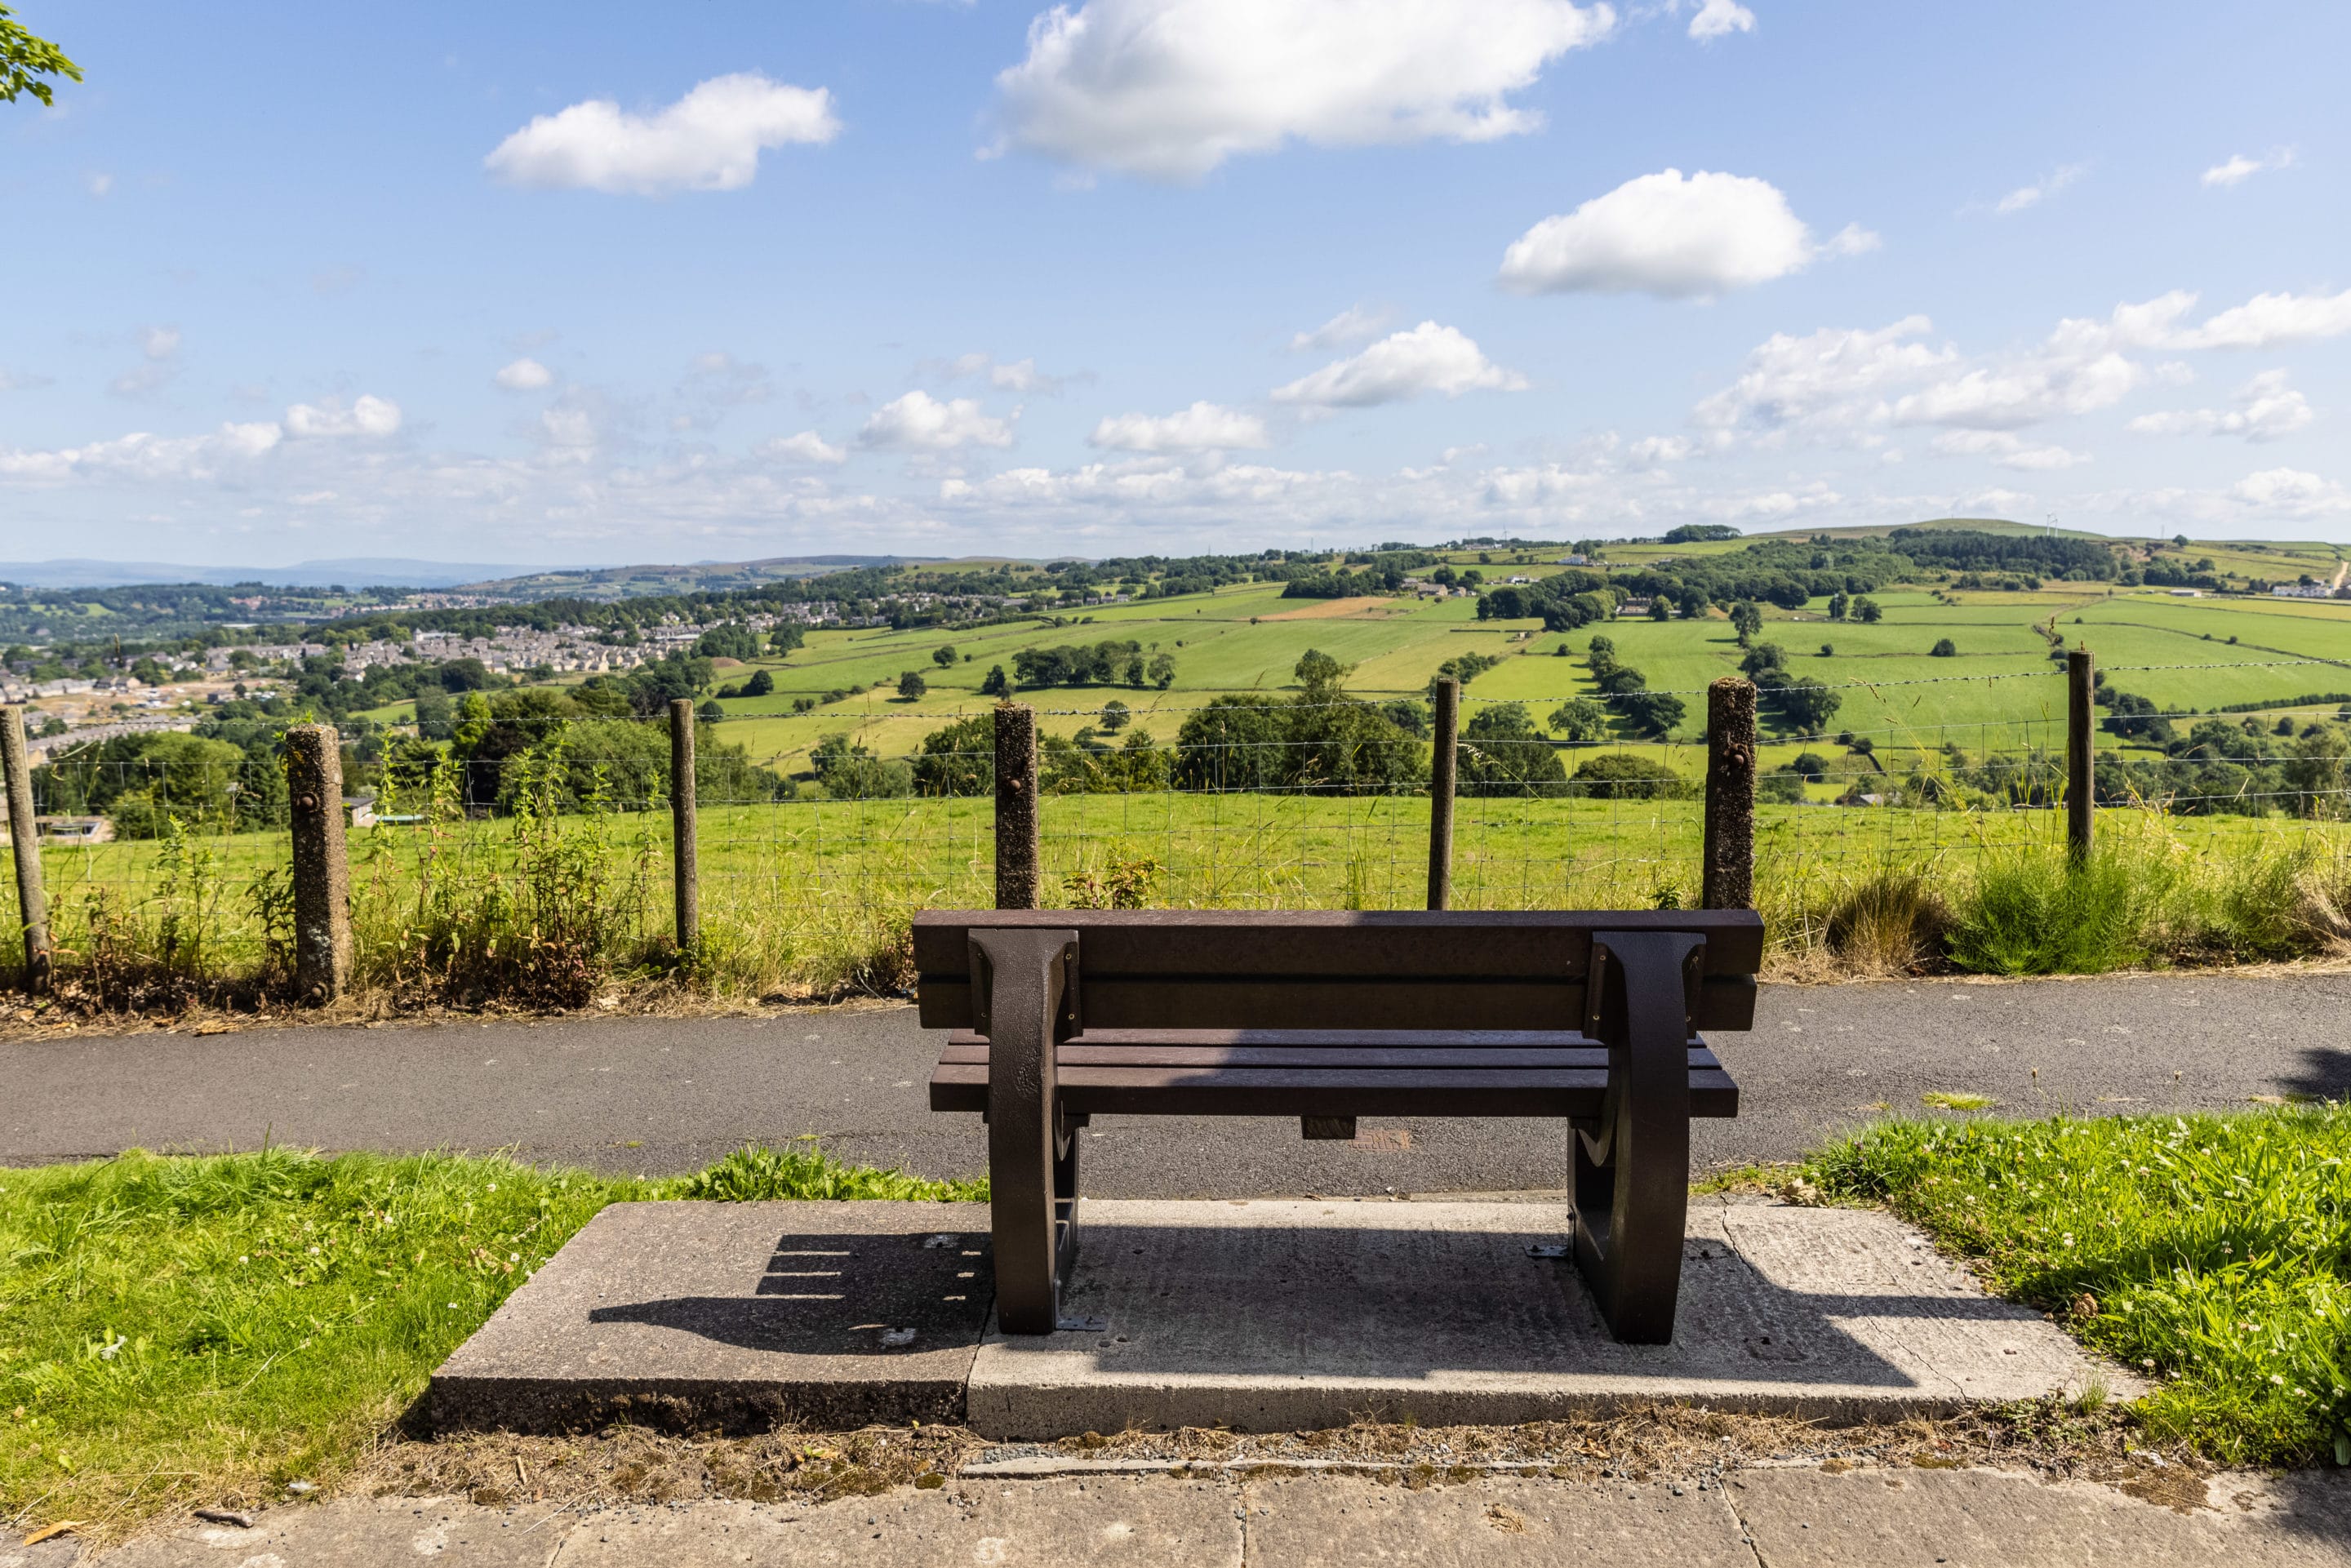 Harewood bench from British Recycled Plastic